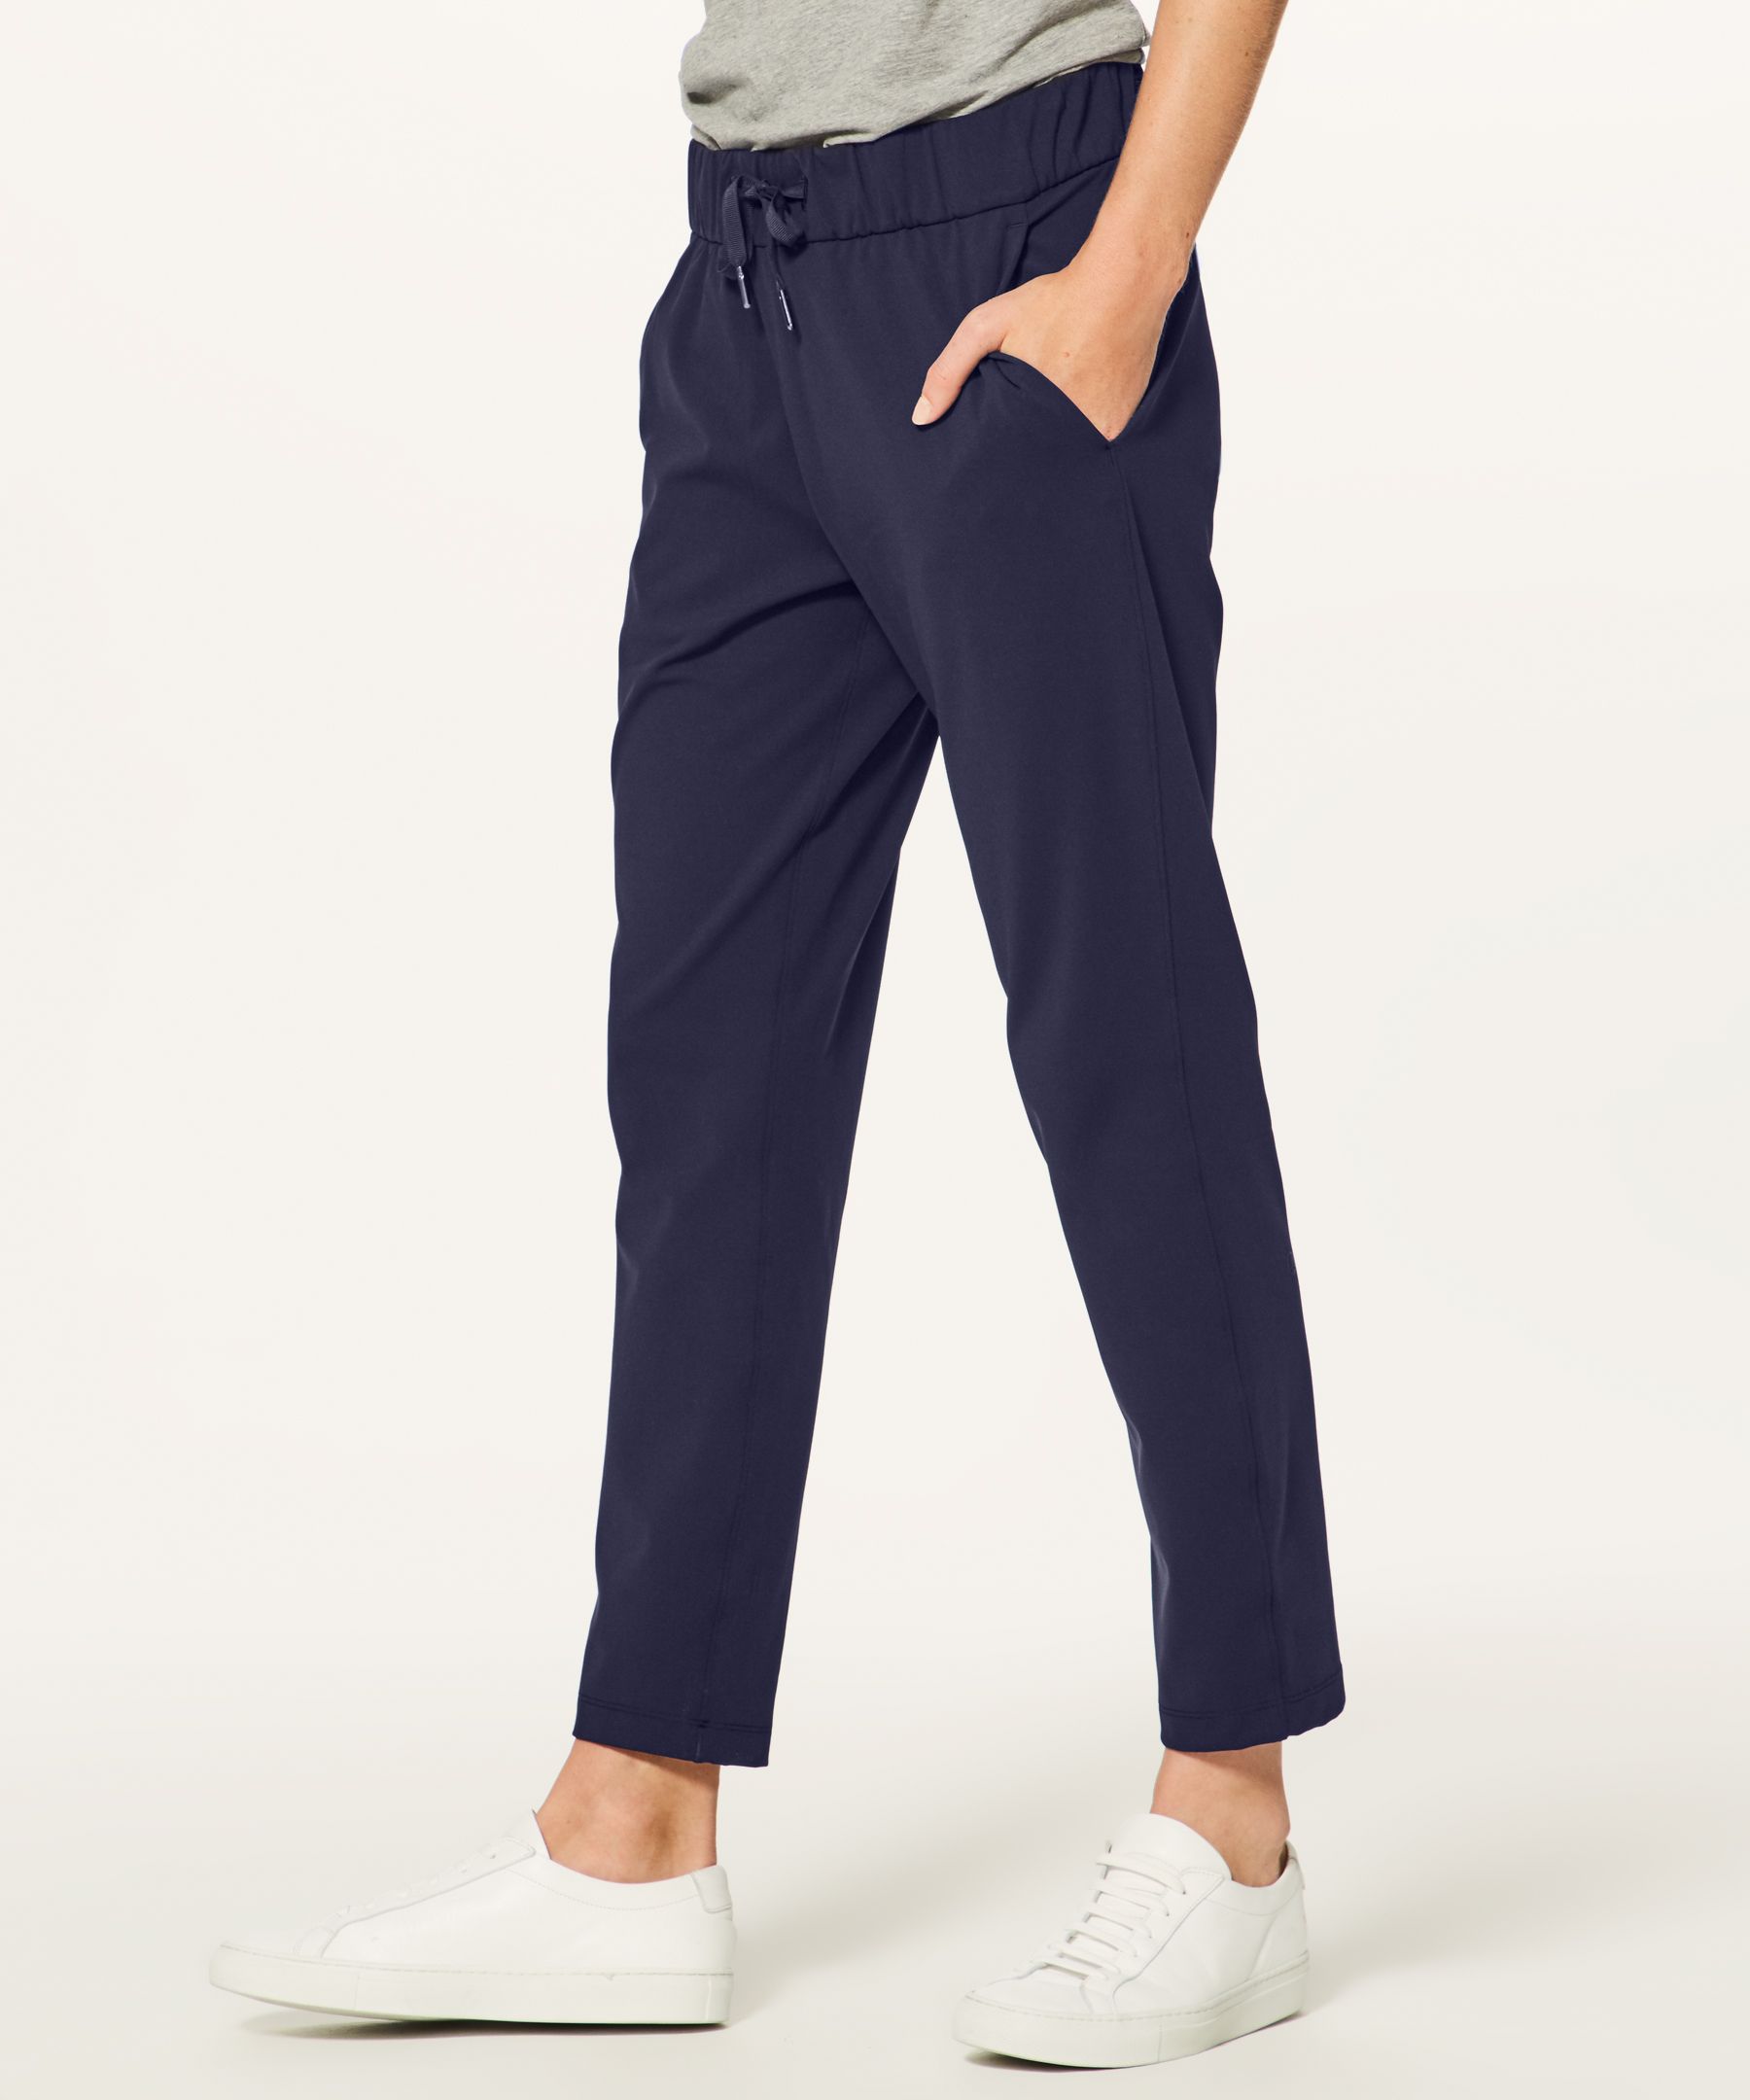 Lululemon On The Fly 7/8 Pant In Navy